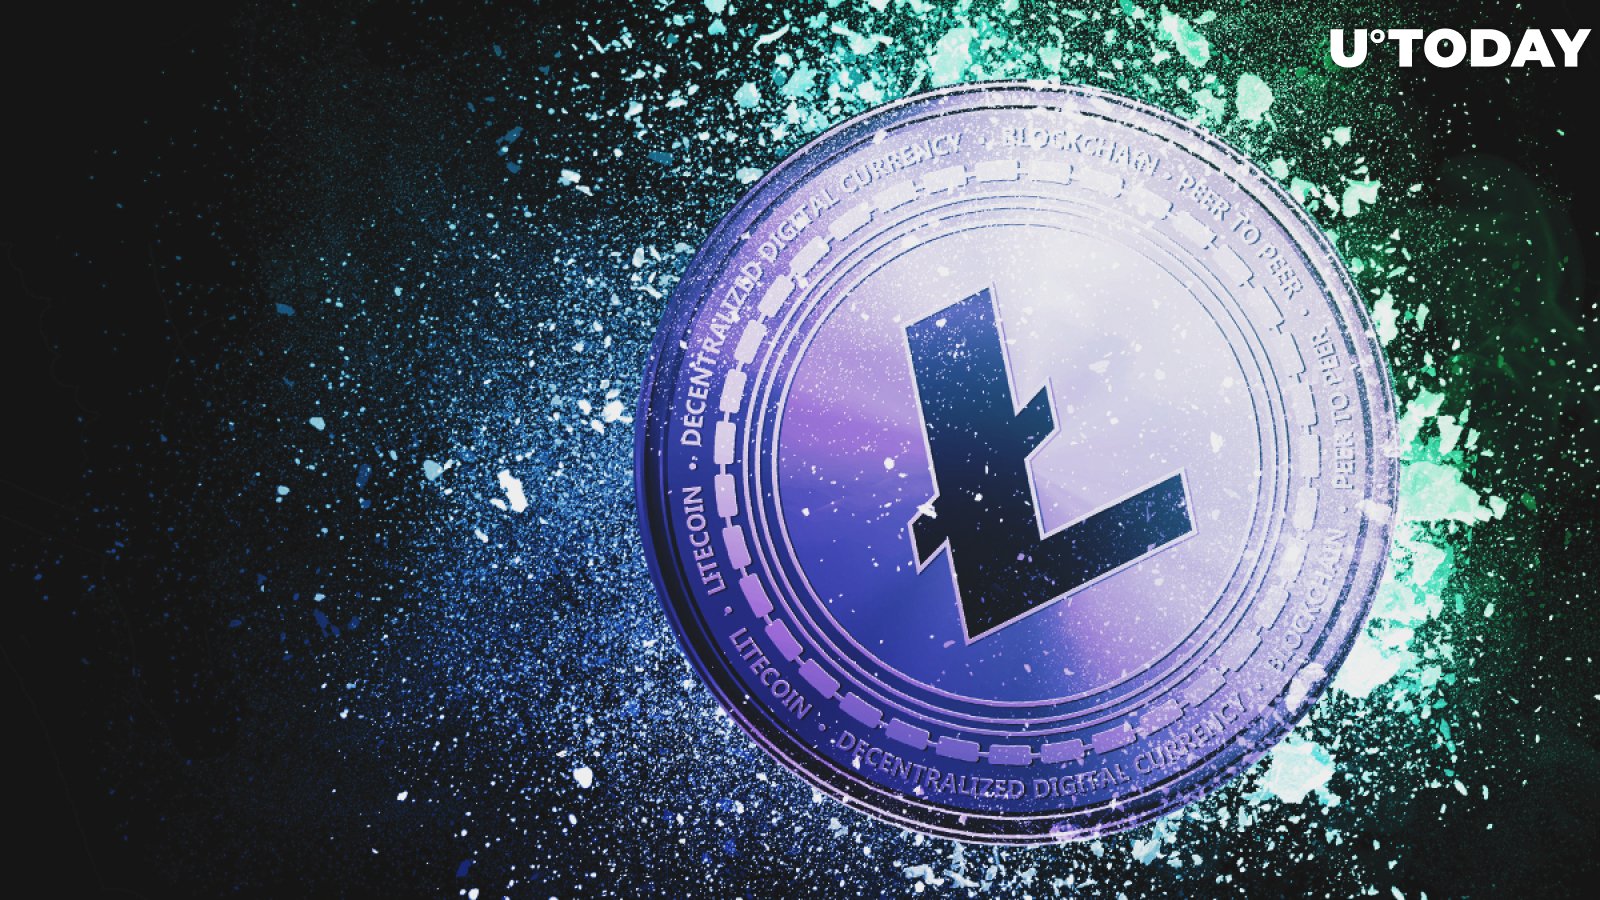 Litecoin Lifts Its Hashrate to All-Time High with LTC Price Rising on the News